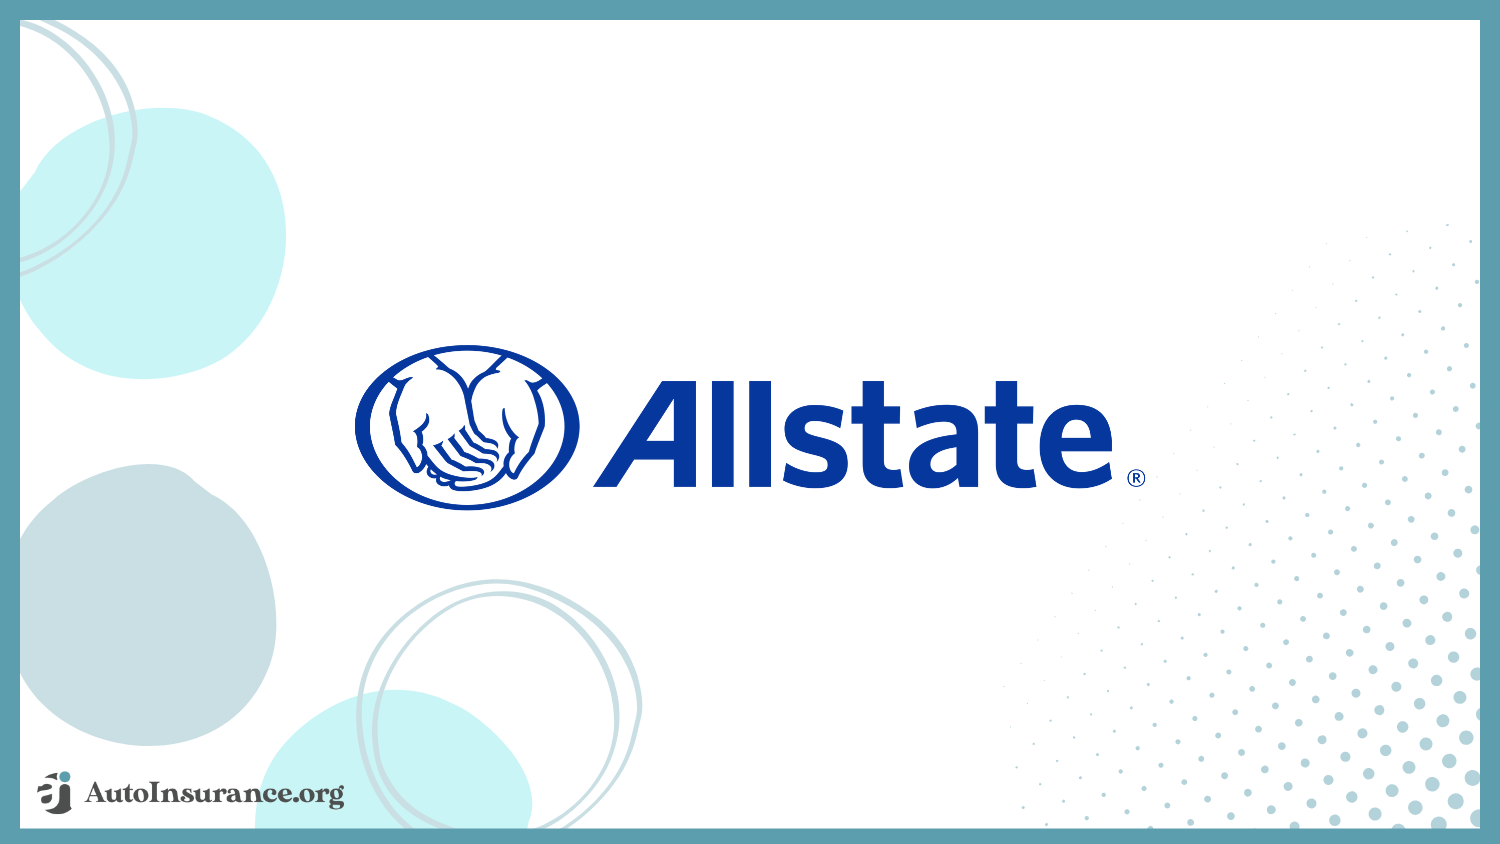 Allstate: Best Auto Insurance for the Wealthy